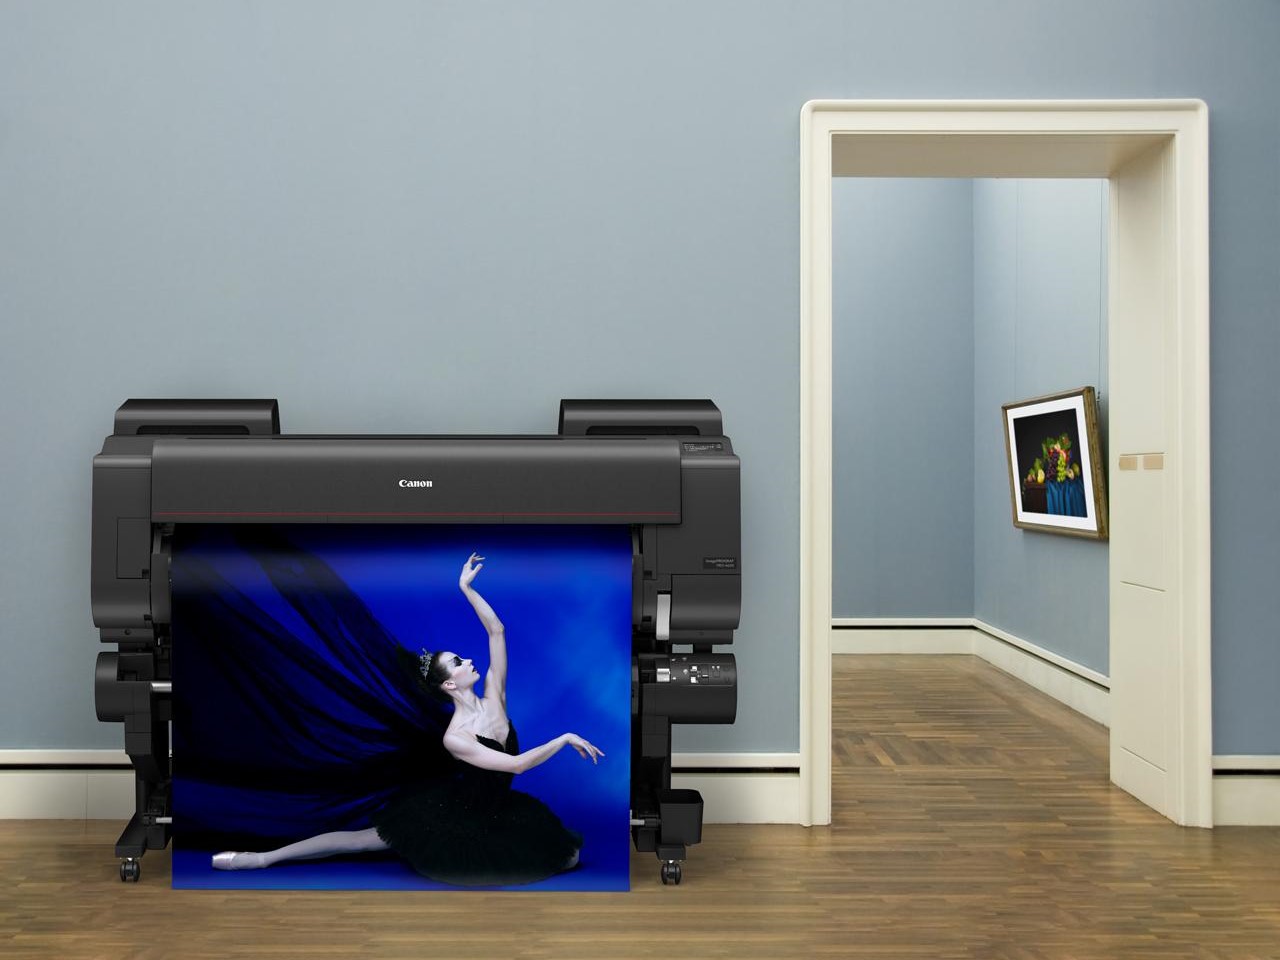 Canon Unveils New imagePROGRAF Series, Its Latest Innovations In Large Format Printing